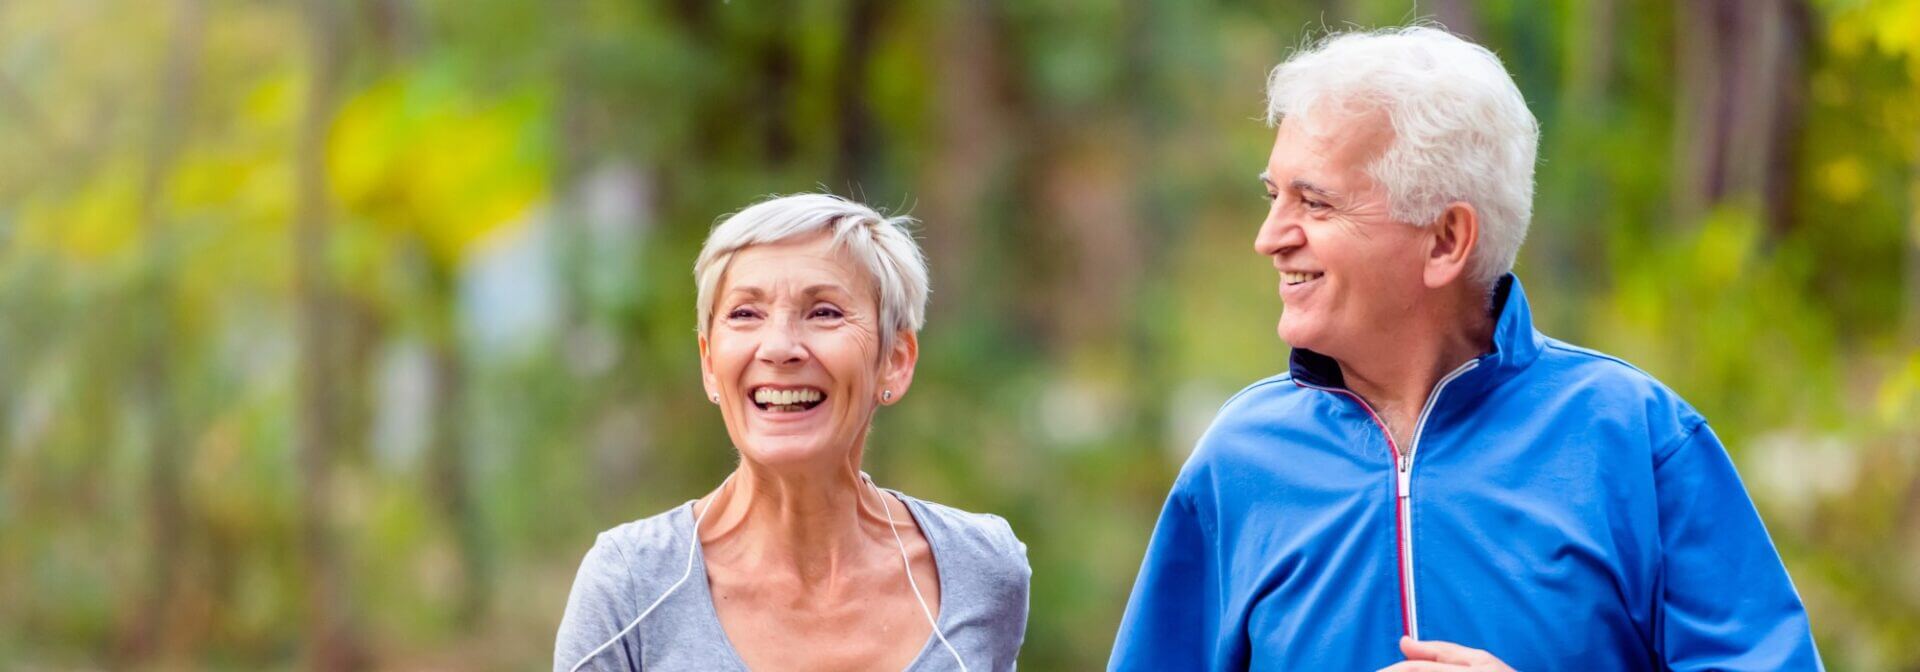 Image of a healthy senior couple jogging after a geriatric care appointment with Lister Health Care in Northern Alabama.